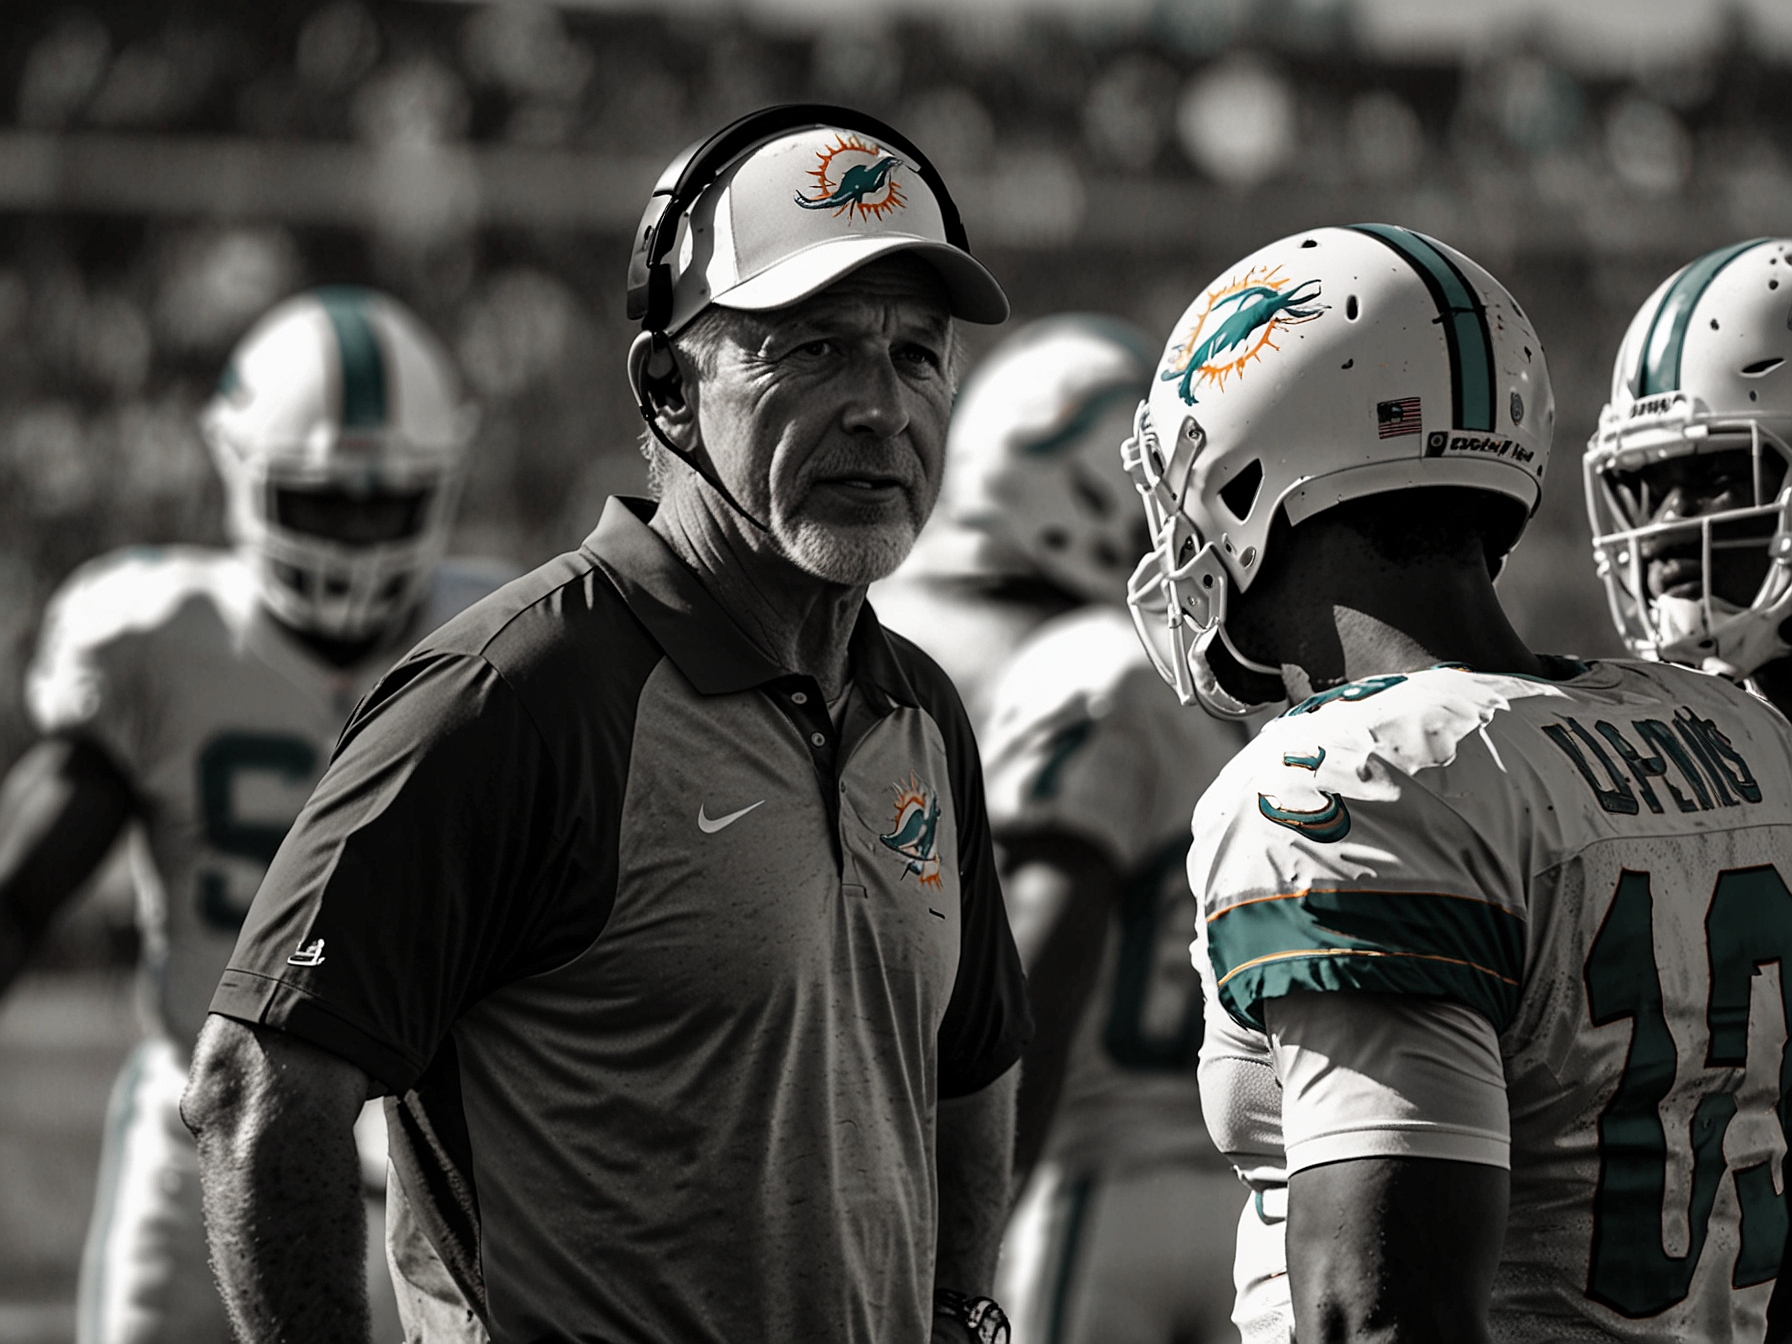 The Miami Dolphins' head coach discussing gameplay strategies with players on the sidelines during an NFL game.